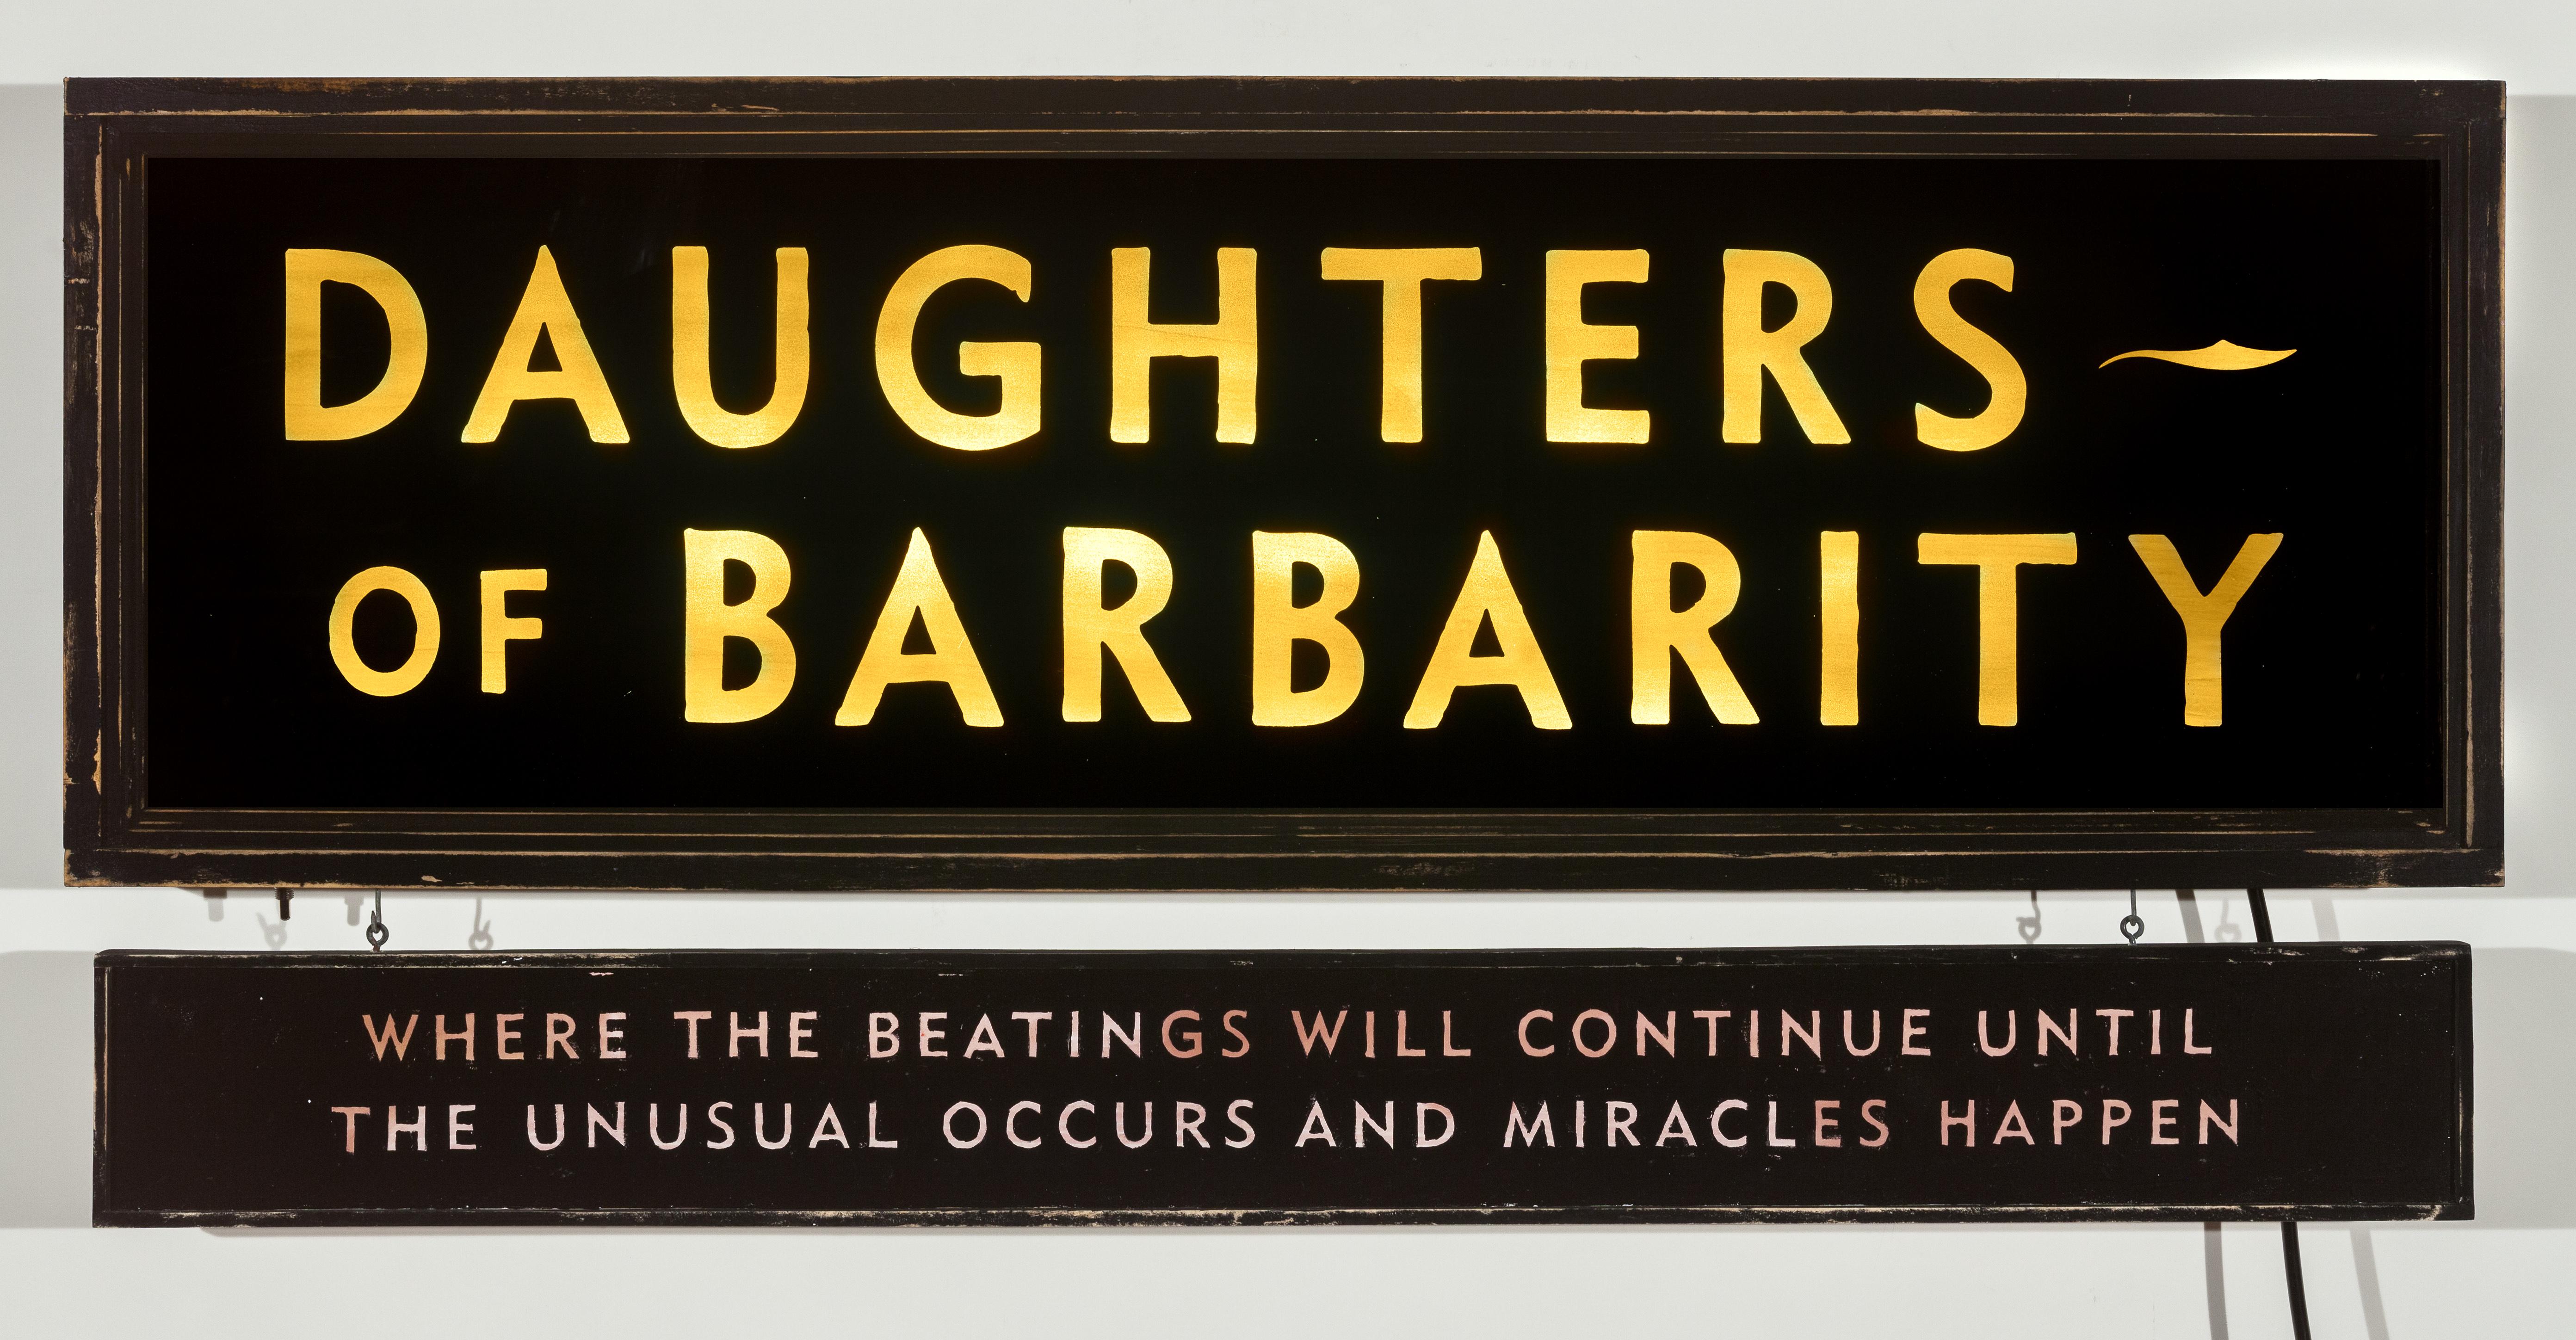 Daughters of Barbarity (lighted sign) - Mixed Media Art by Skylar Fein